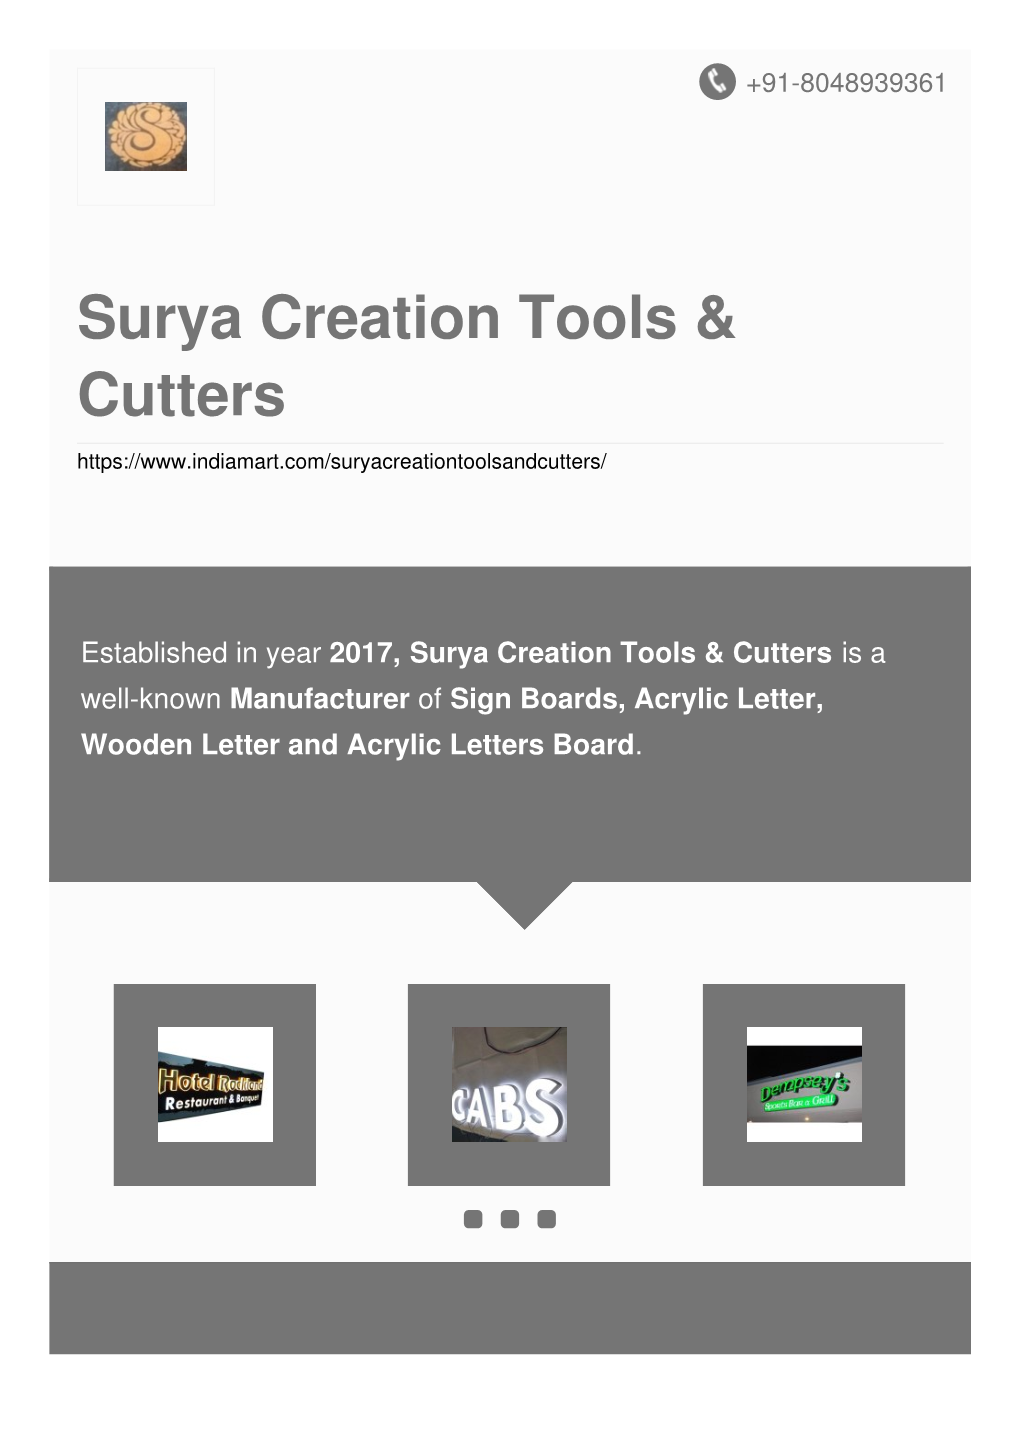 Surya Creation Tools & Cutters